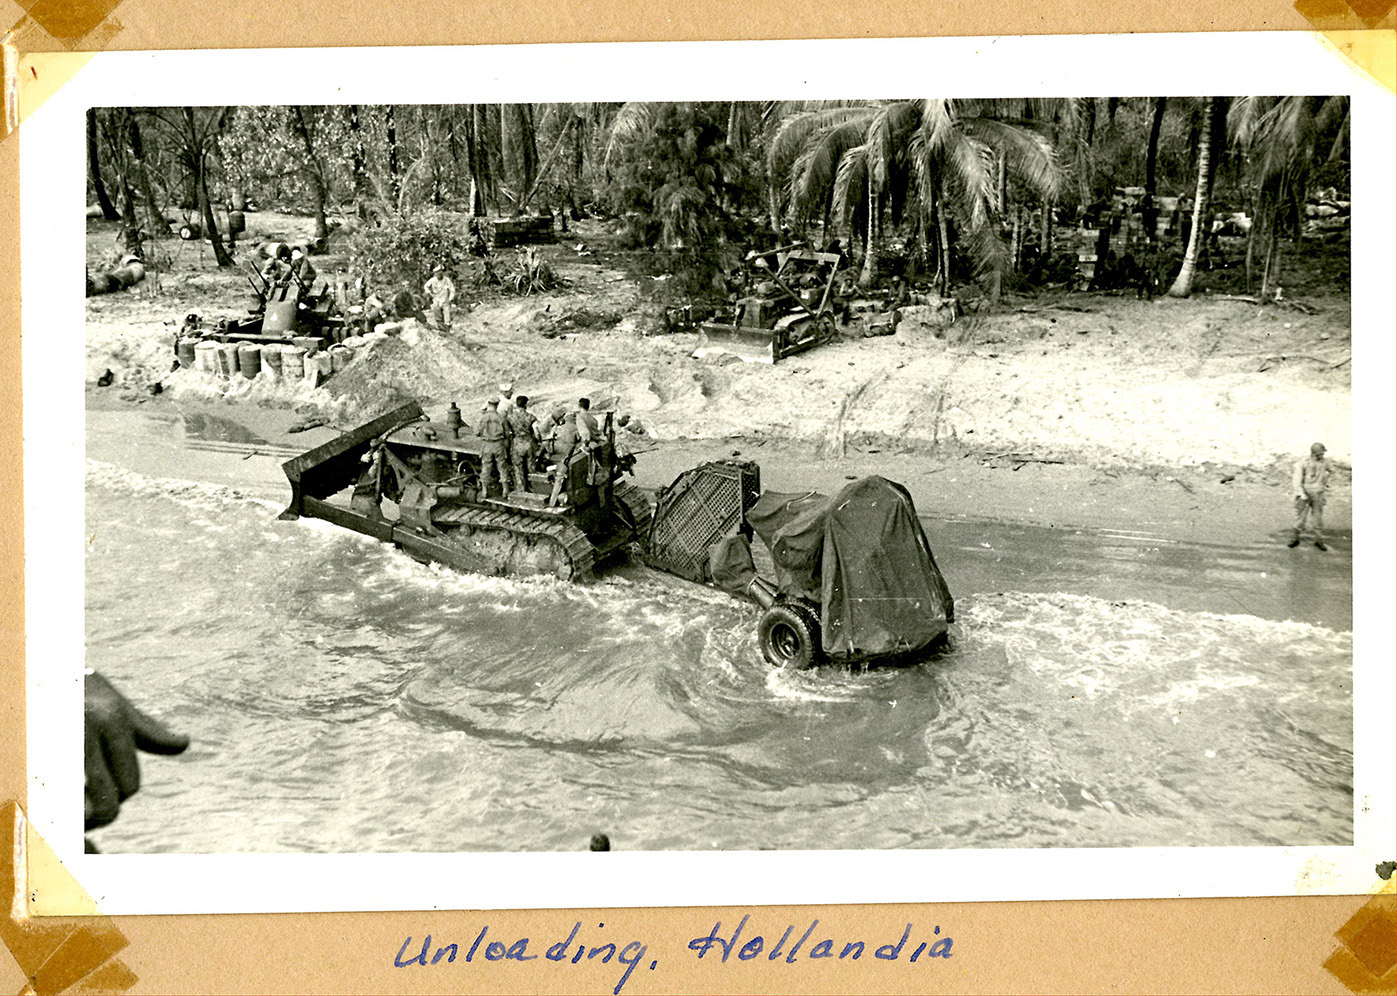 overhead view of men on a bulldozer in shallow water